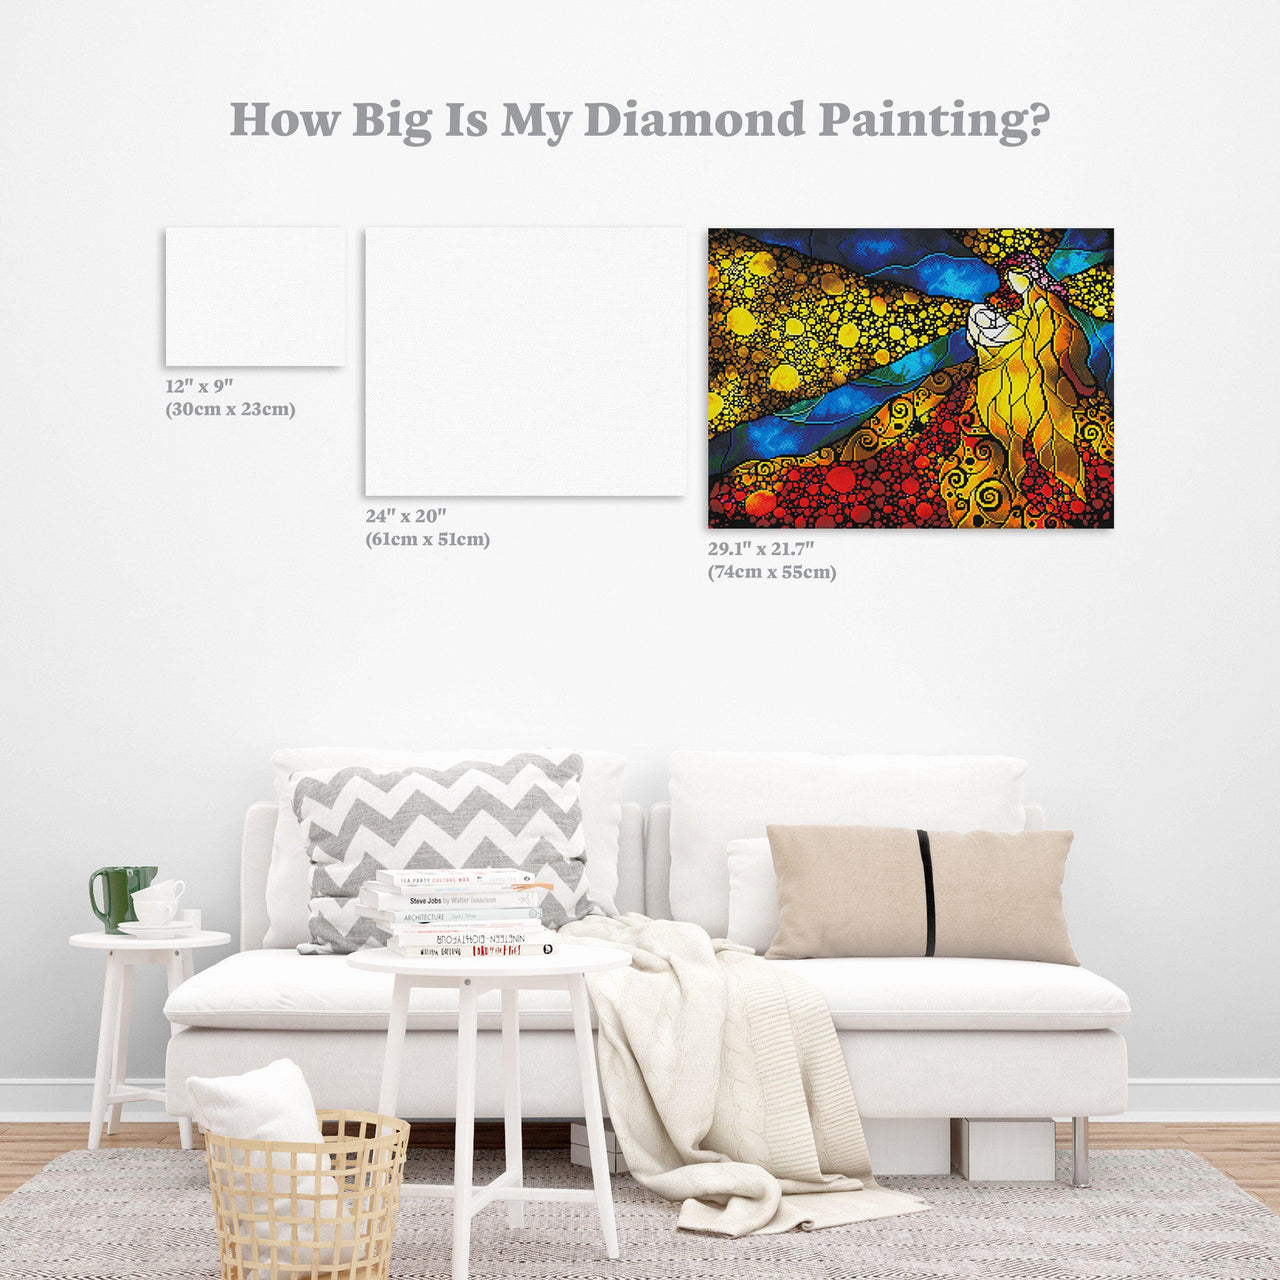 Diamond Painting What Child Is This 21.7" x 29.1" (55cm x 74cm) / Round With 40 Colors Including 2 ABs / 50,828